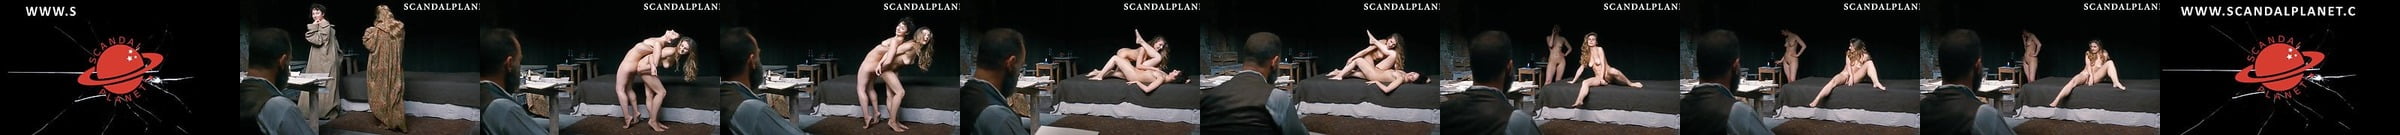 Iris Boss And Antje Monning Nude Pussies On Scandalplanet De